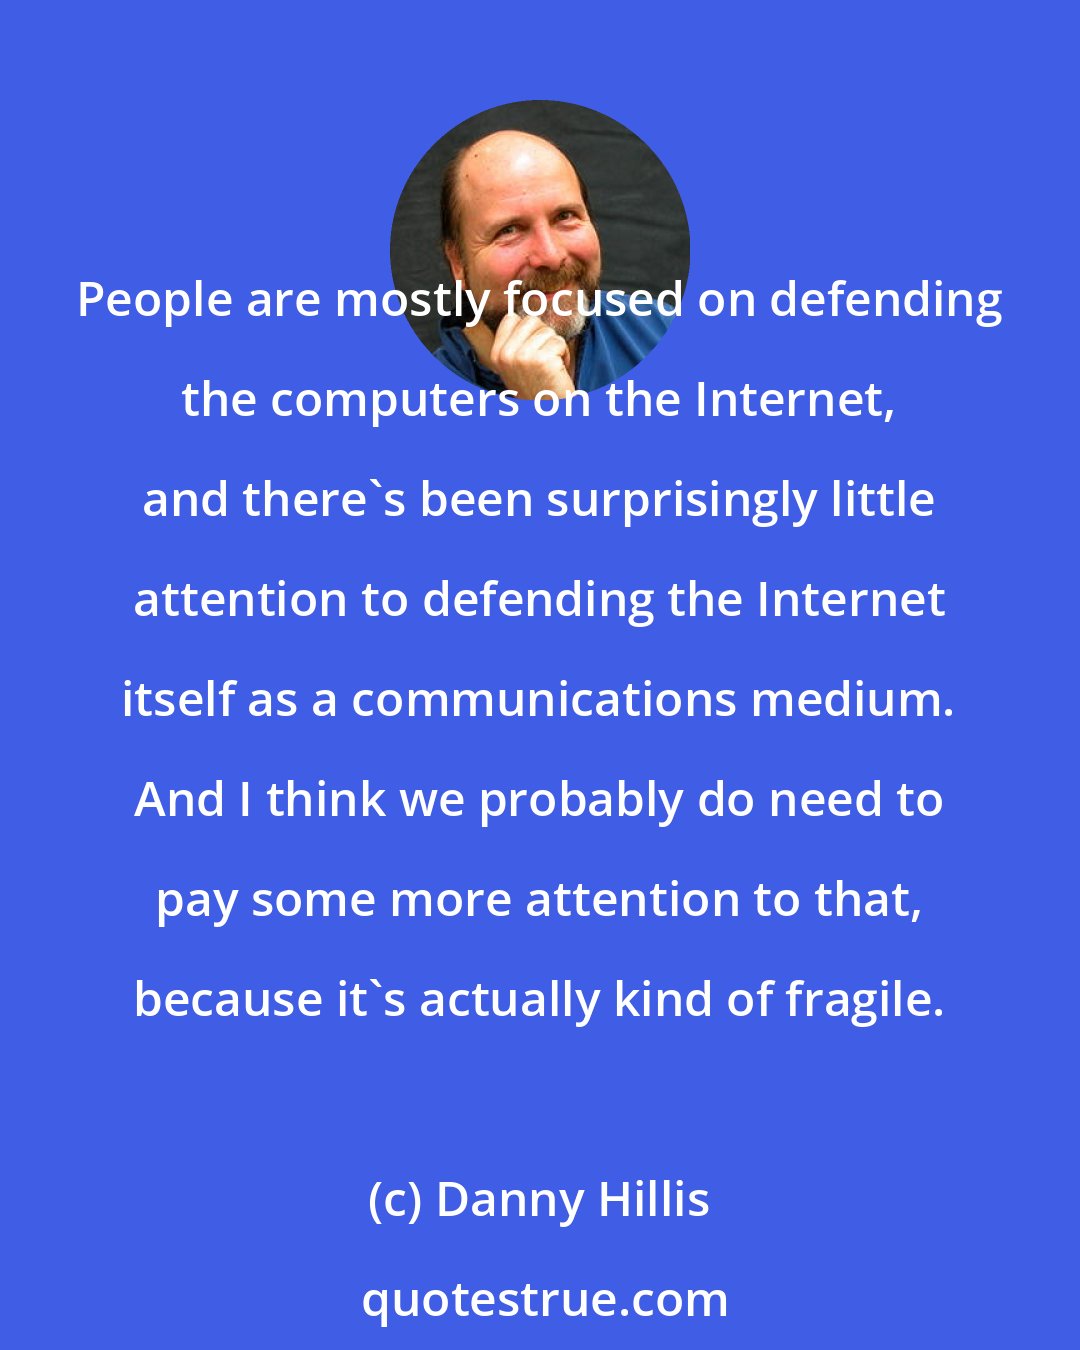 Danny Hillis: People are mostly focused on defending the computers on the Internet, and there's been surprisingly little attention to defending the Internet itself as a communications medium. And I think we probably do need to pay some more attention to that, because it's actually kind of fragile.